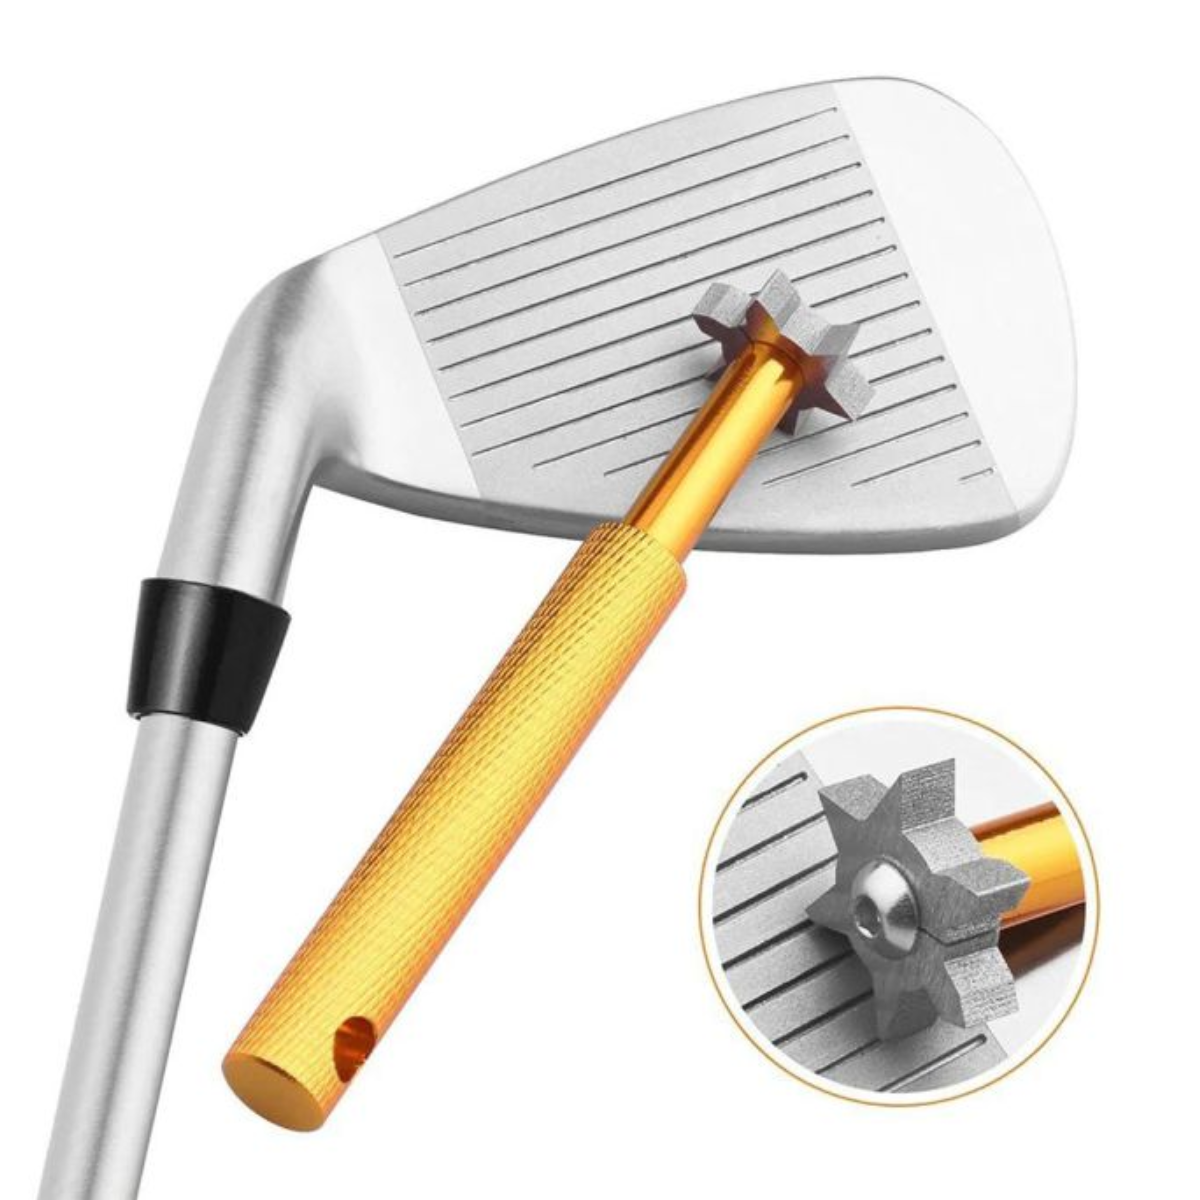 GolfBasic Groove Sharpener Tool With 6 Cutter Faces